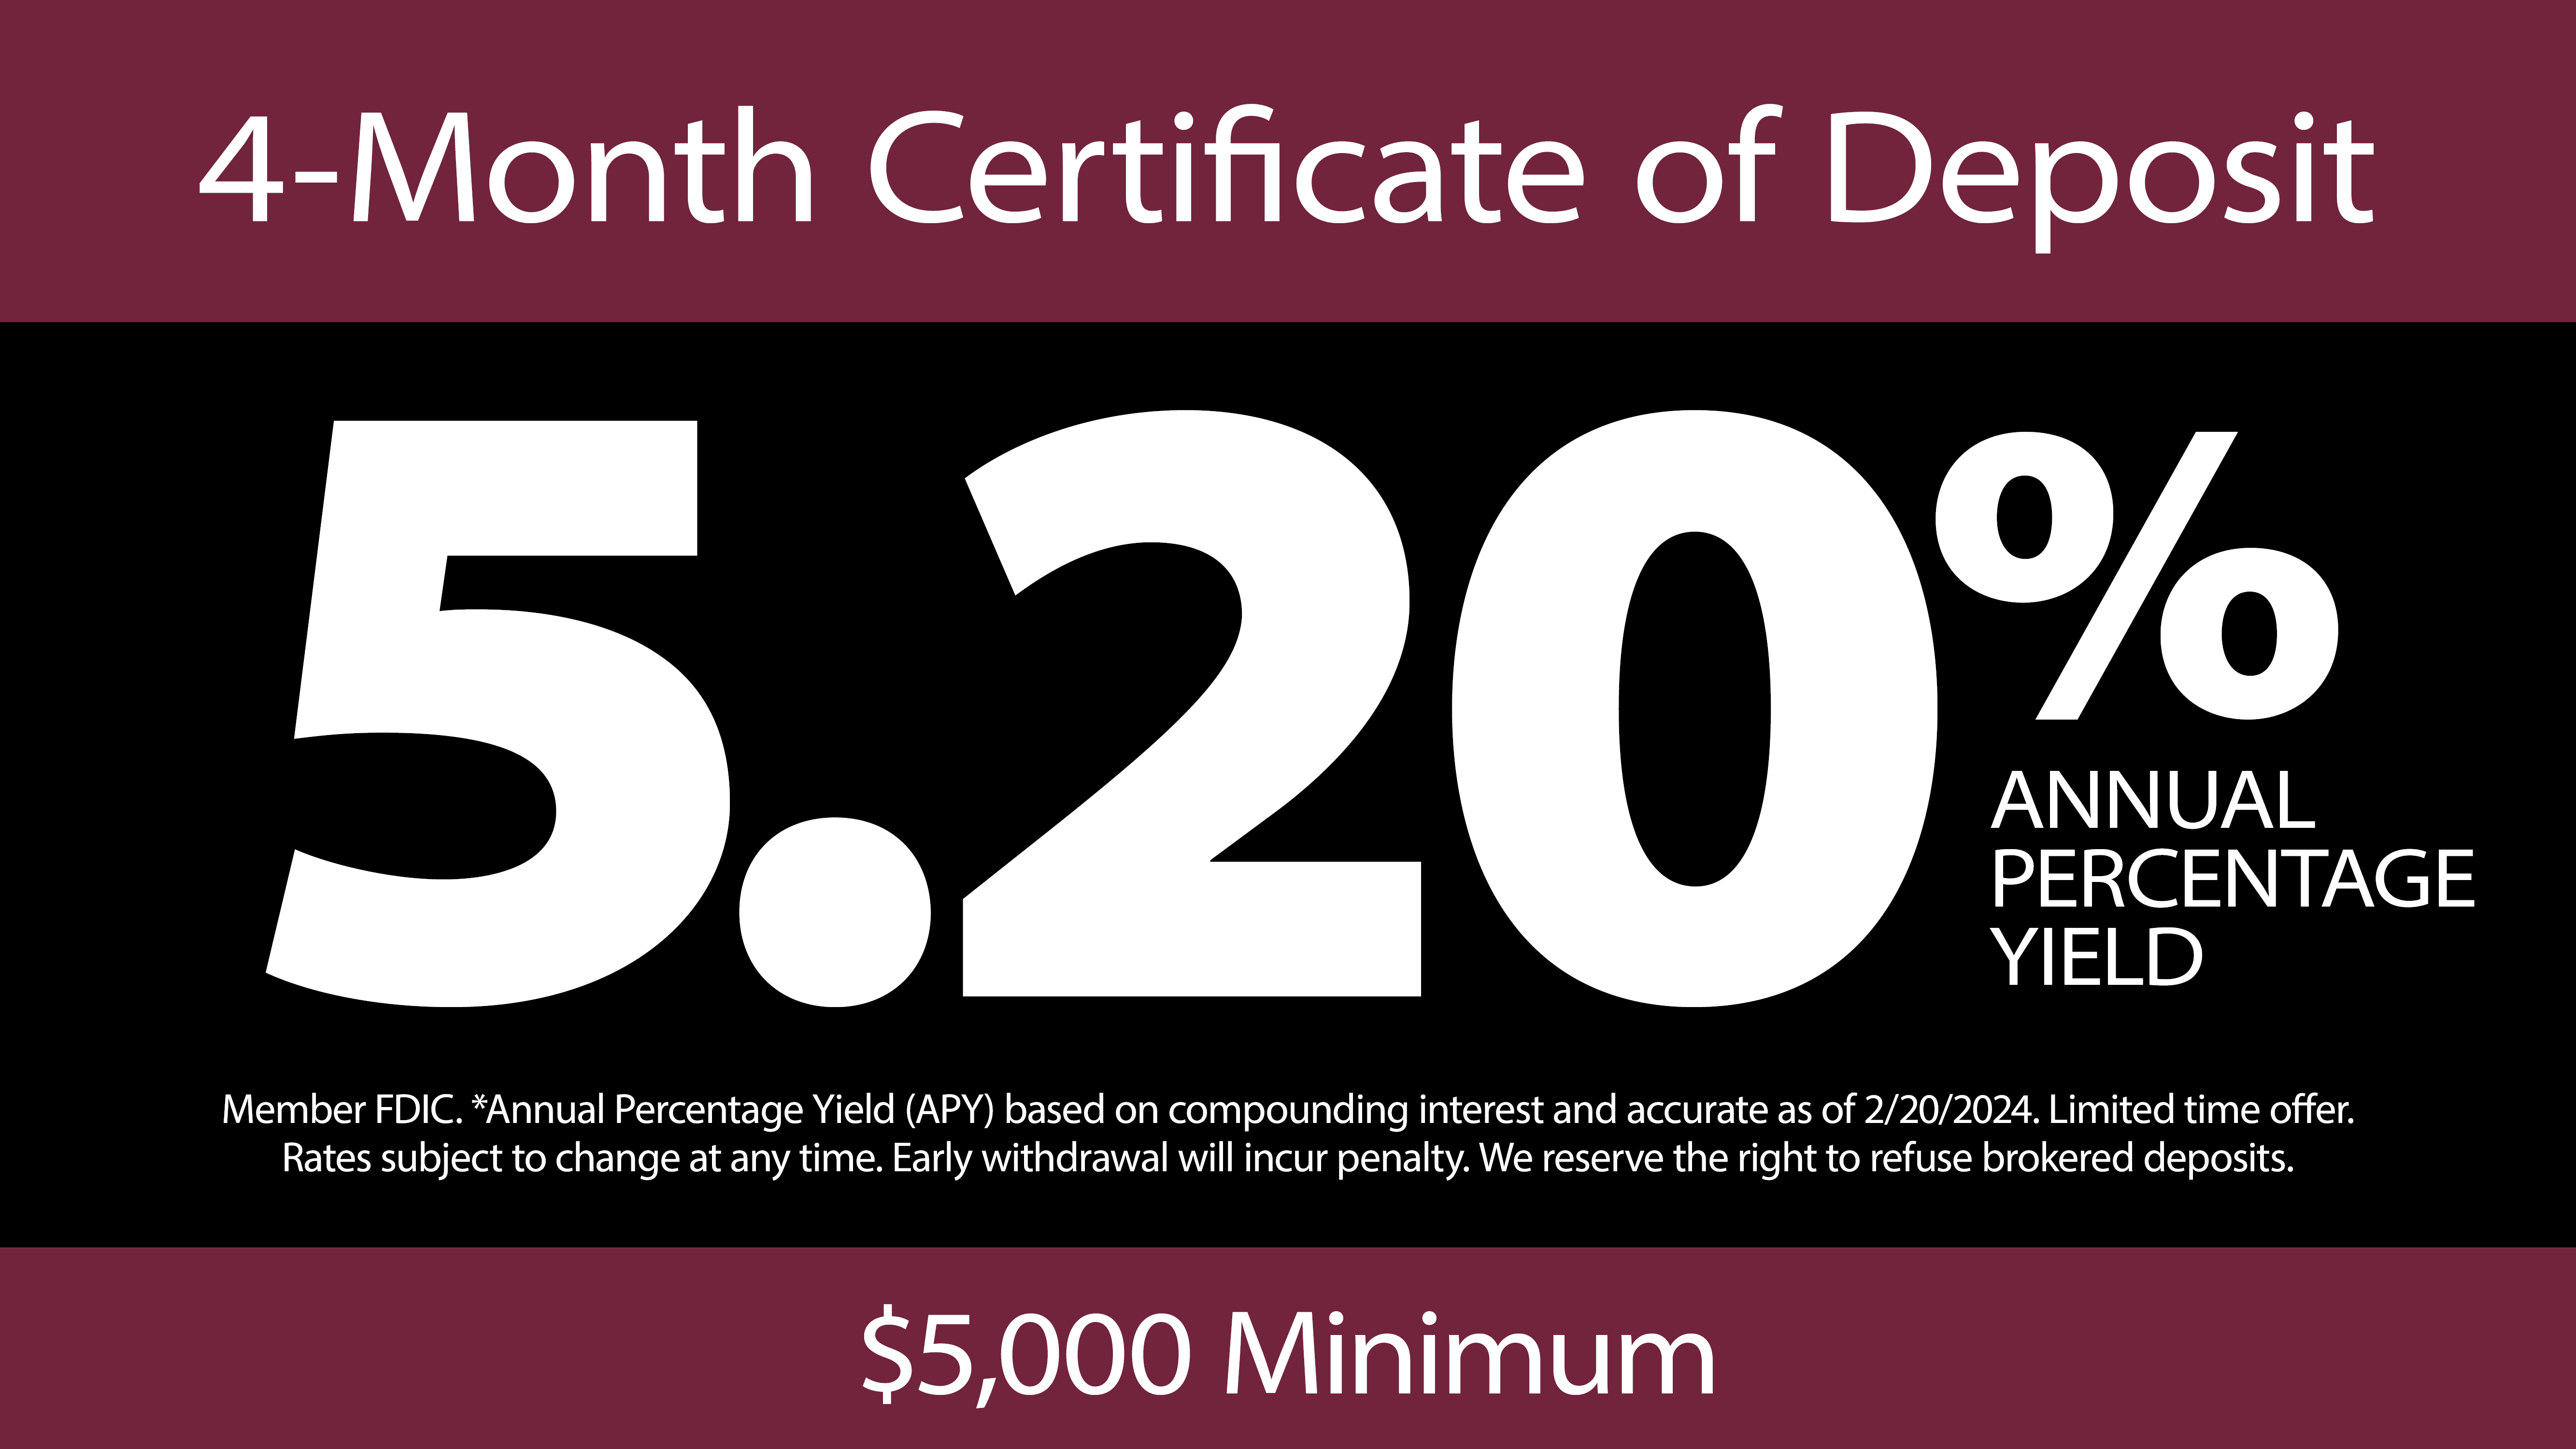 A 4-Month CD special with 5.20% APY and $5,000 minimum deposit